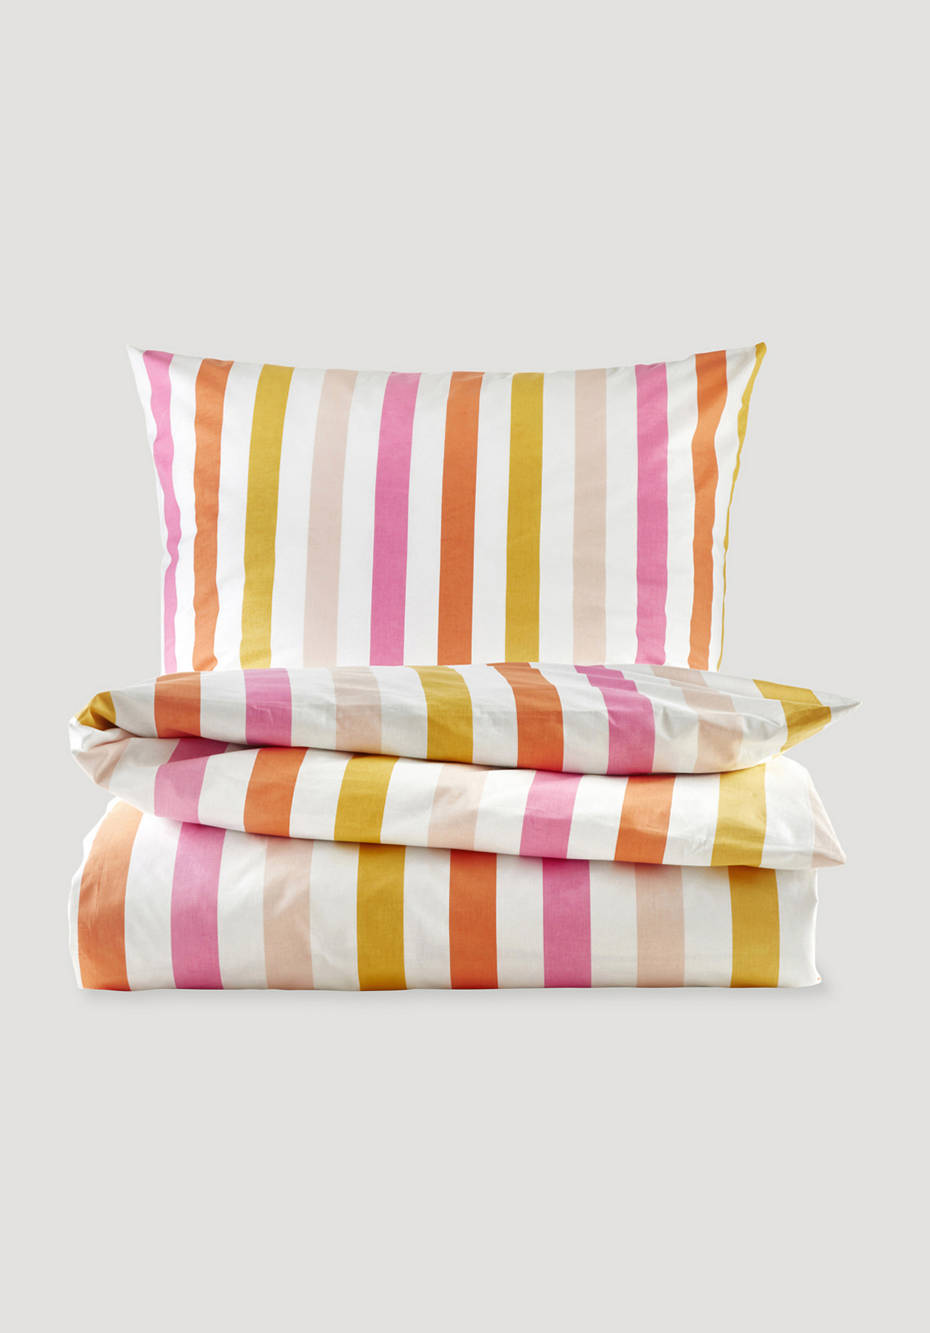 Renforcé Rimini bed linen made from pure organic cotton